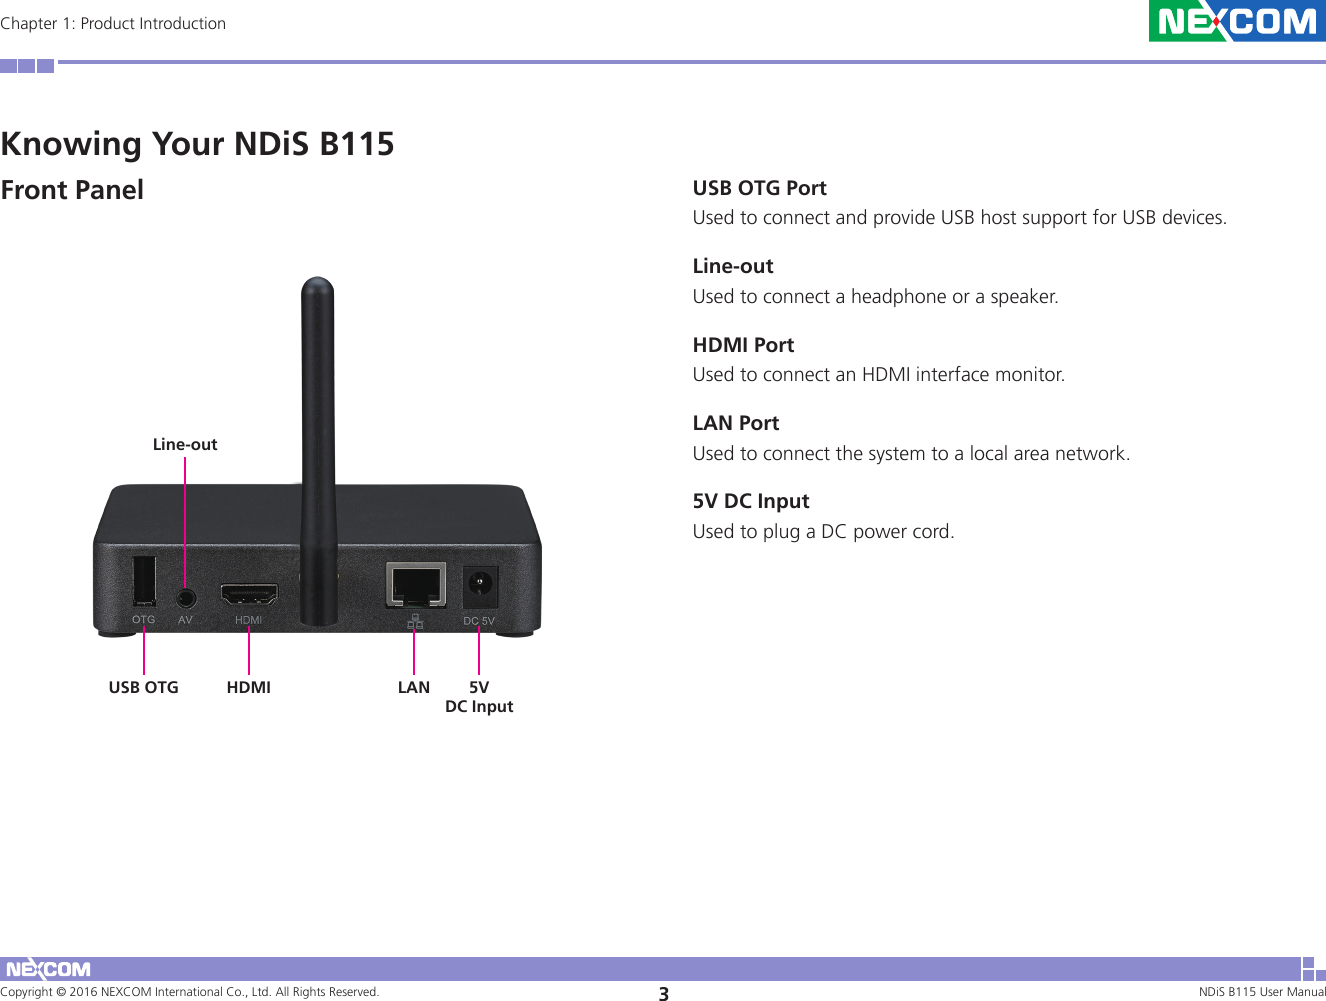 Copyright © 2016 NEXCOM International Co., Ltd. All Rights Reserved. 3NDiS B115 User Manual Chapter 1: Product IntroductionKnowing Your NDiS B115Front Panel USB OTG PortUsed to connect and provide USB host support for USB devices.Line-outUsed to connect a headphone or a speaker.HDMI PortUsed to connect an HDMI interface monitor.LAN PortUsed to connect the system to a local area network.5V DC InputUsed to plug a DC power cord.HDMI LANUSB OTGLine-out5VDC Input